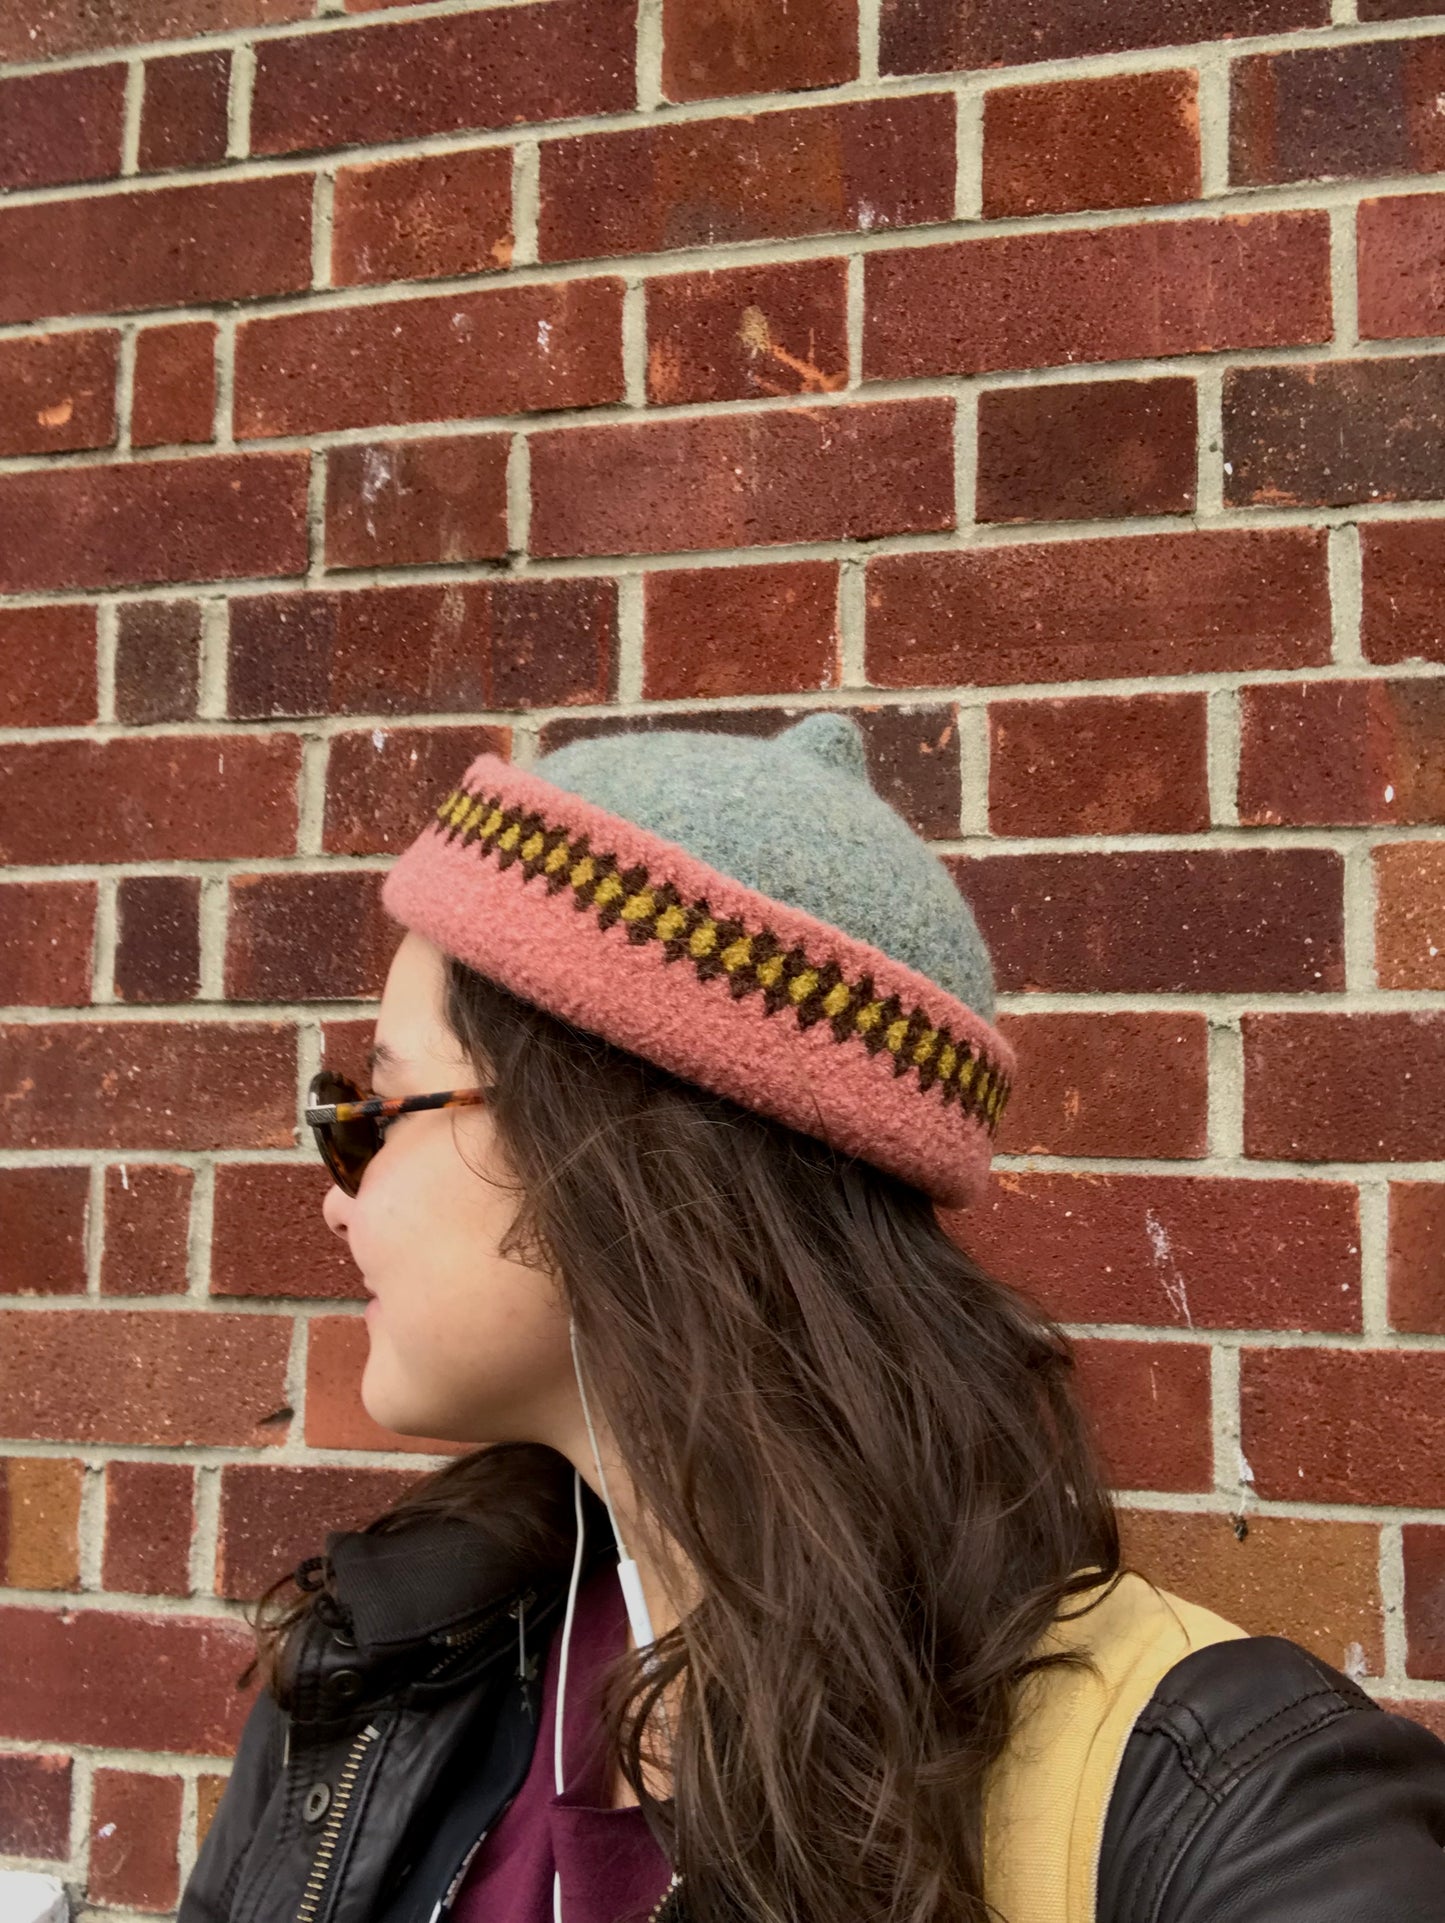 Pink patterned edge and grey top woollen hat